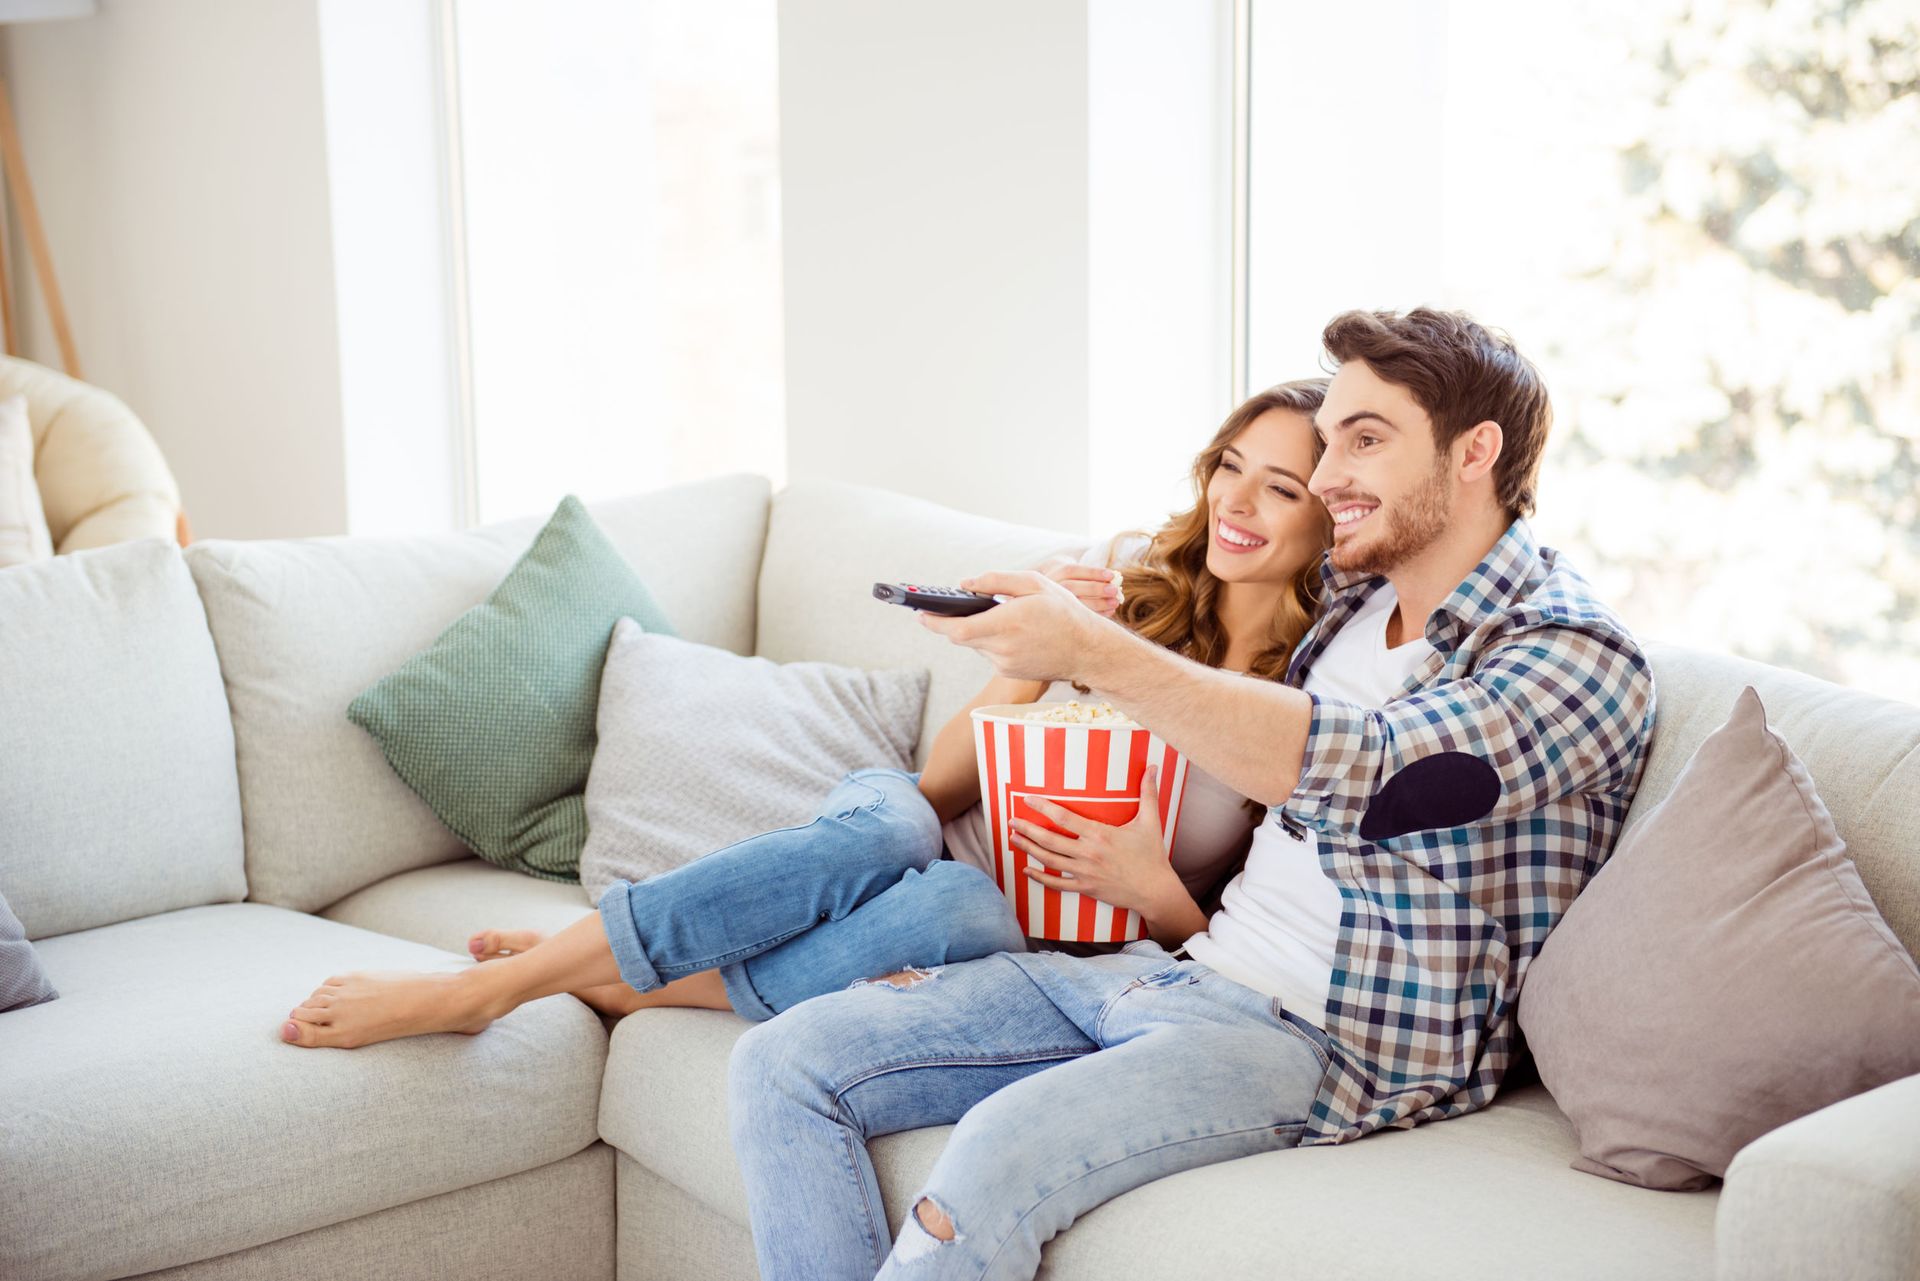 Profile side view of his he her she two person nice attractive charming cheerful guy lady sitting on divan watching new drama comedy in light white style interior living room hotel house indoors.